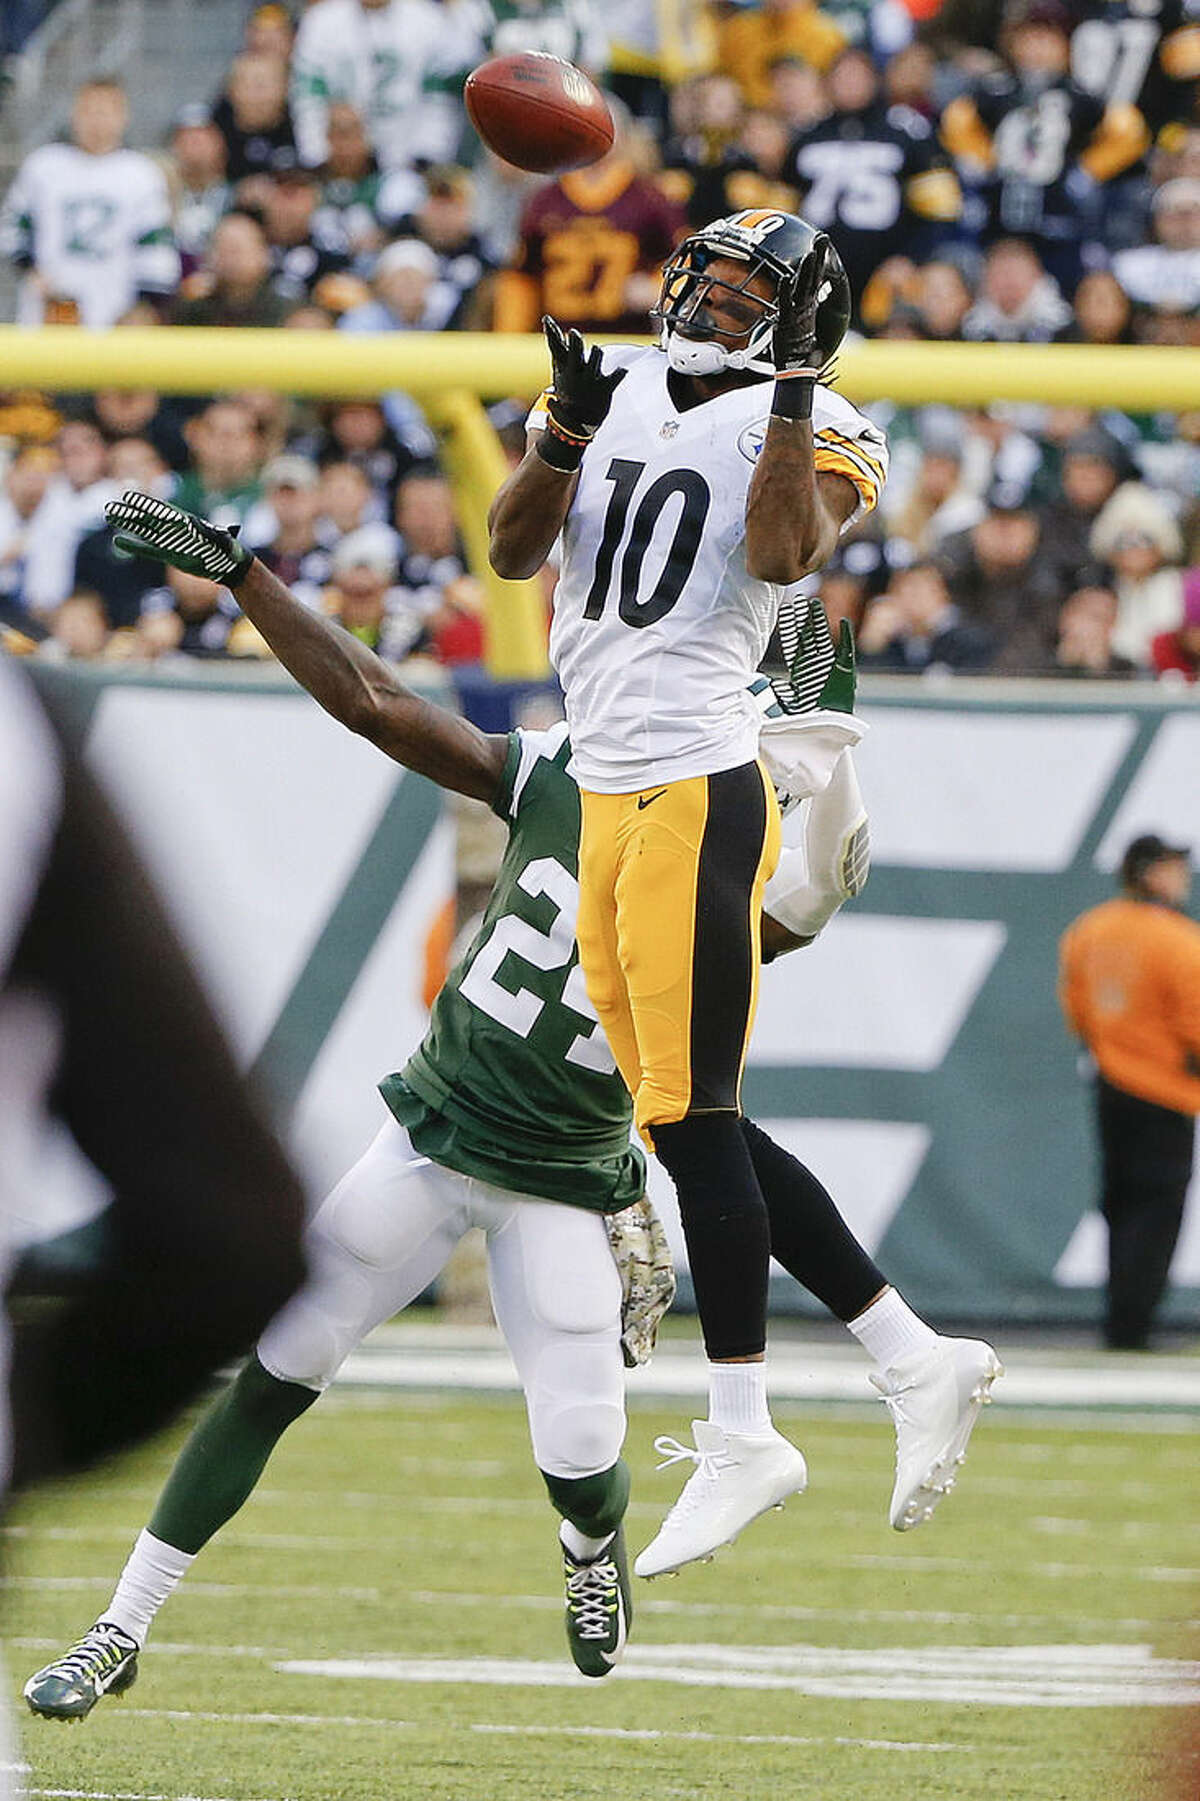 Pittsburgh Steelers wide receiver Martavis Bryant (10) catches a pass in front of New York Jets' Phillip Adams (24) during the second half of an NFL football game Sunday, Nov. 9, 2014, in East Rutherford, N.J. (AP Photo/Kathy Willens)